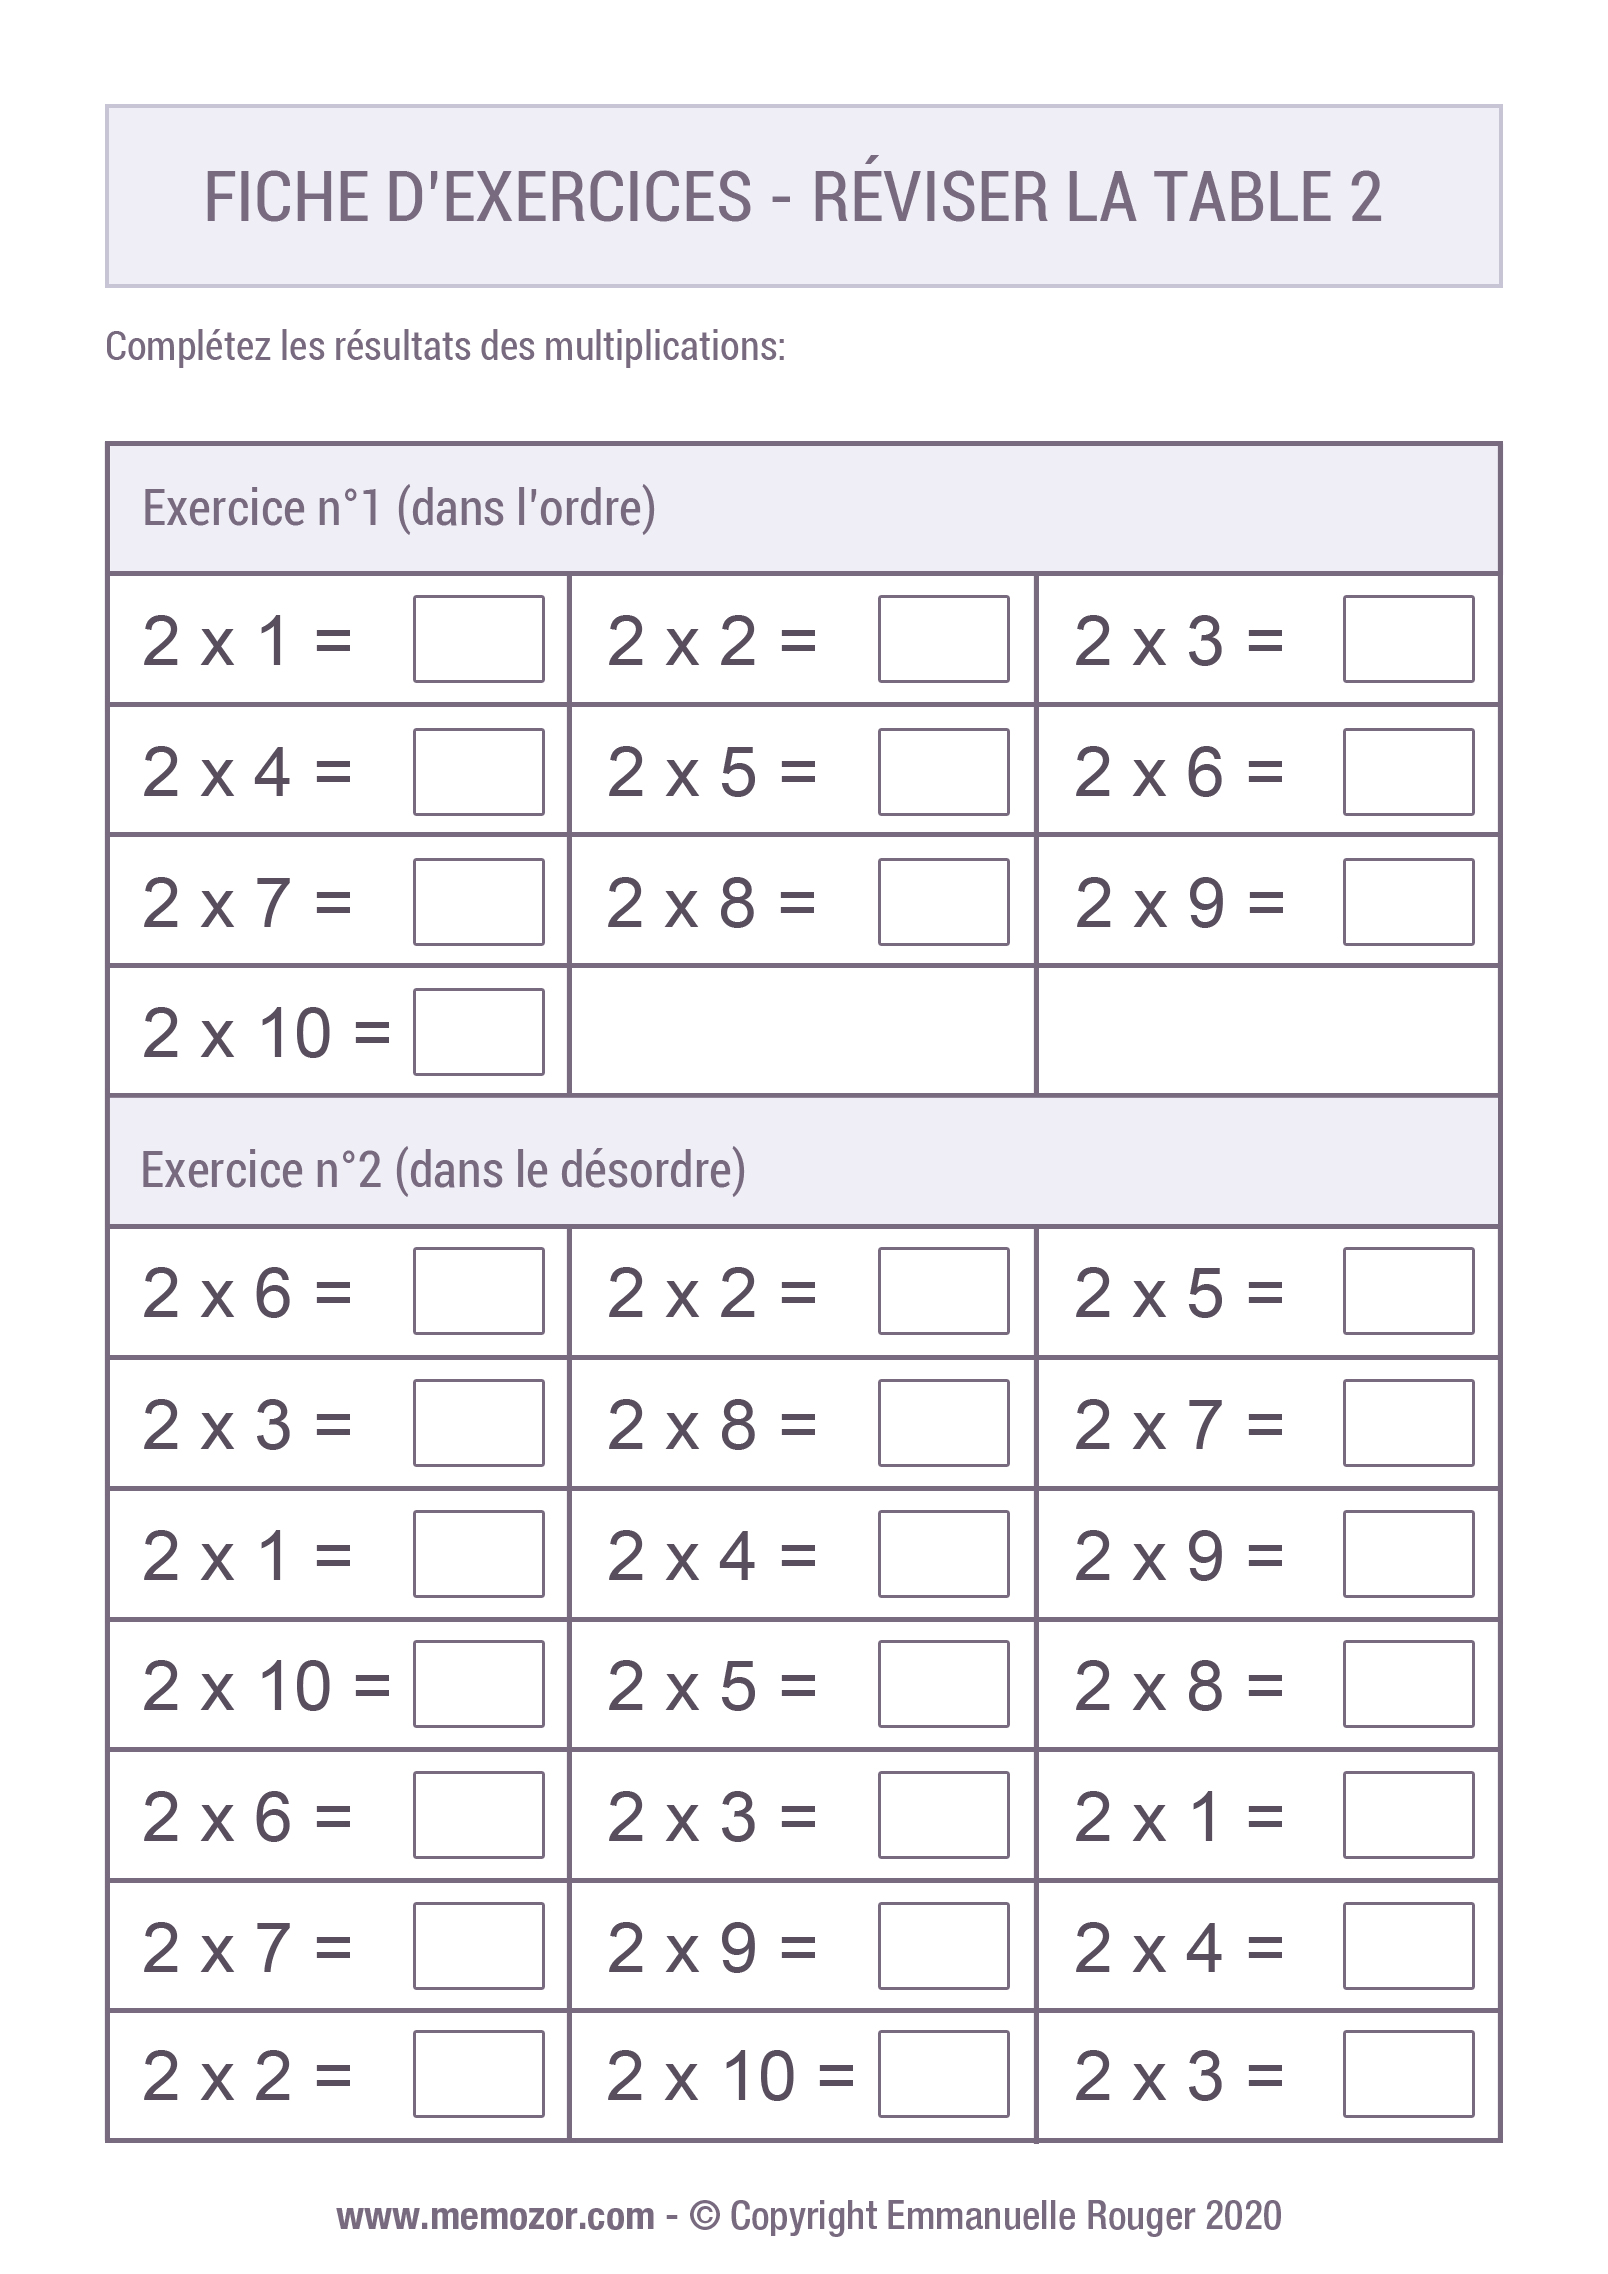 worksheet-on-multiplication-table-of-5-word-problems-on-5-times-table